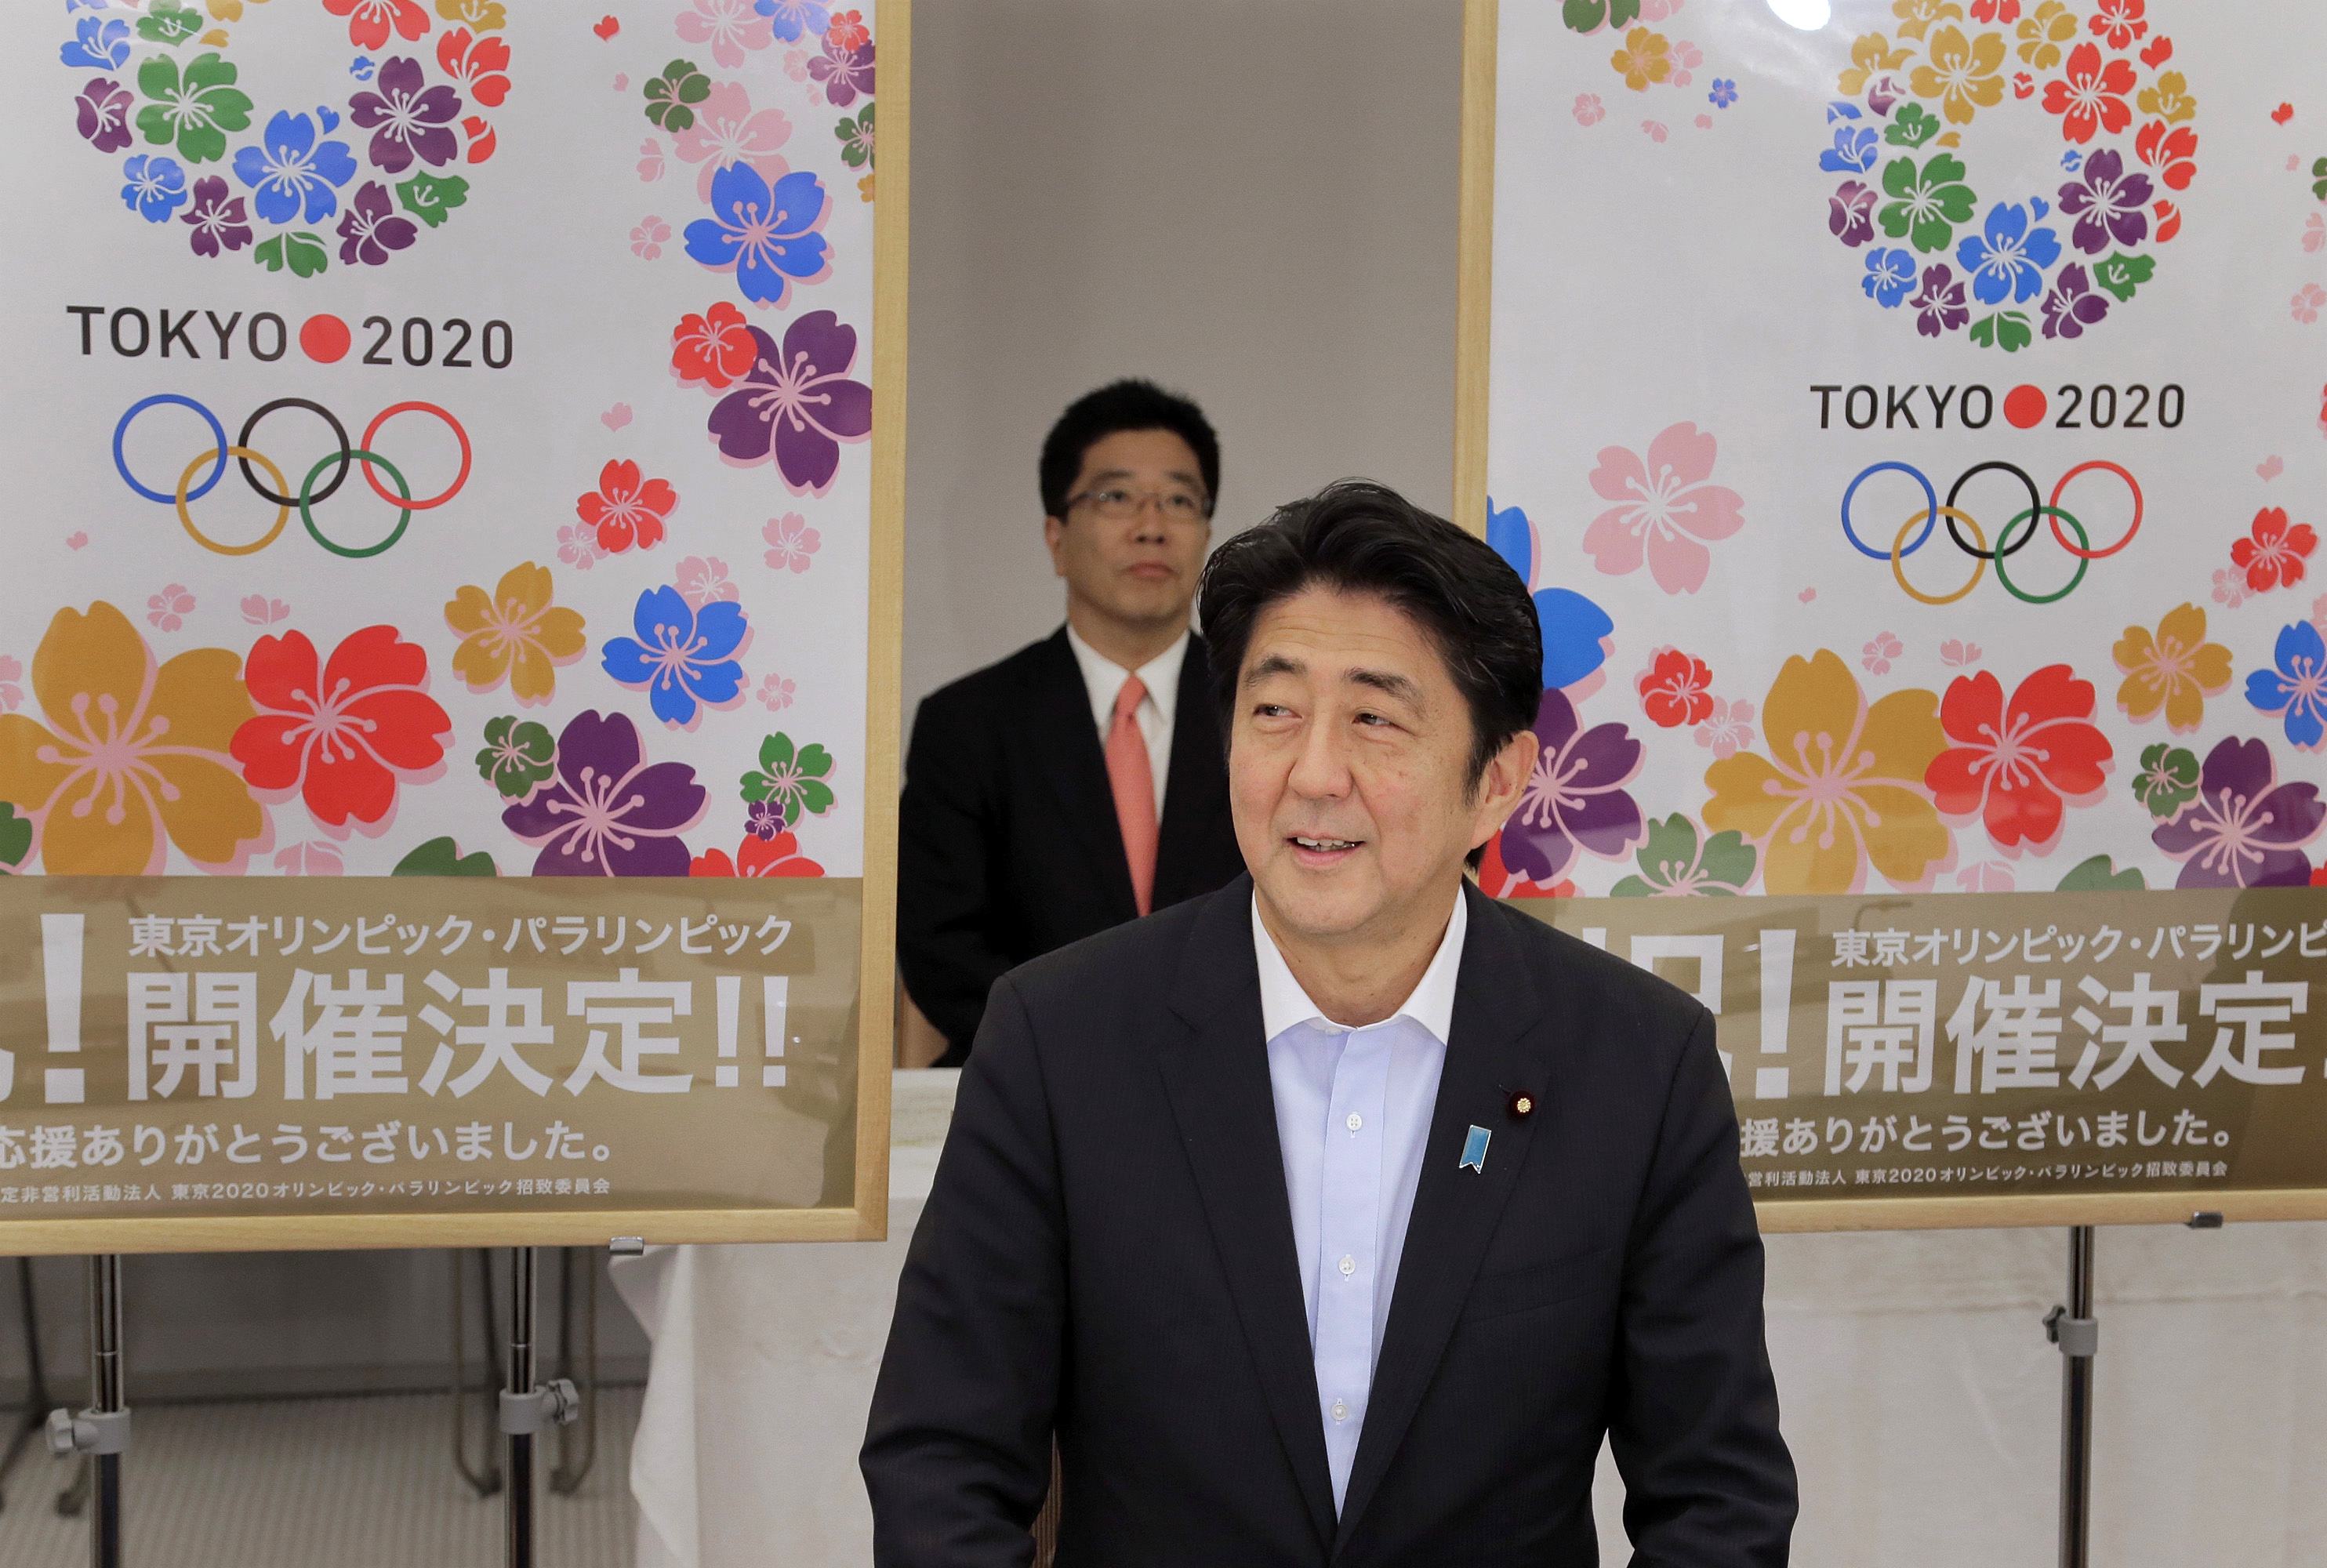 Japan's Prime Minister Abe smiles as he reports to his cabinet members Tokyo's successful bid to host the 2020 Summer Olympics and Paralympics in Tokyo